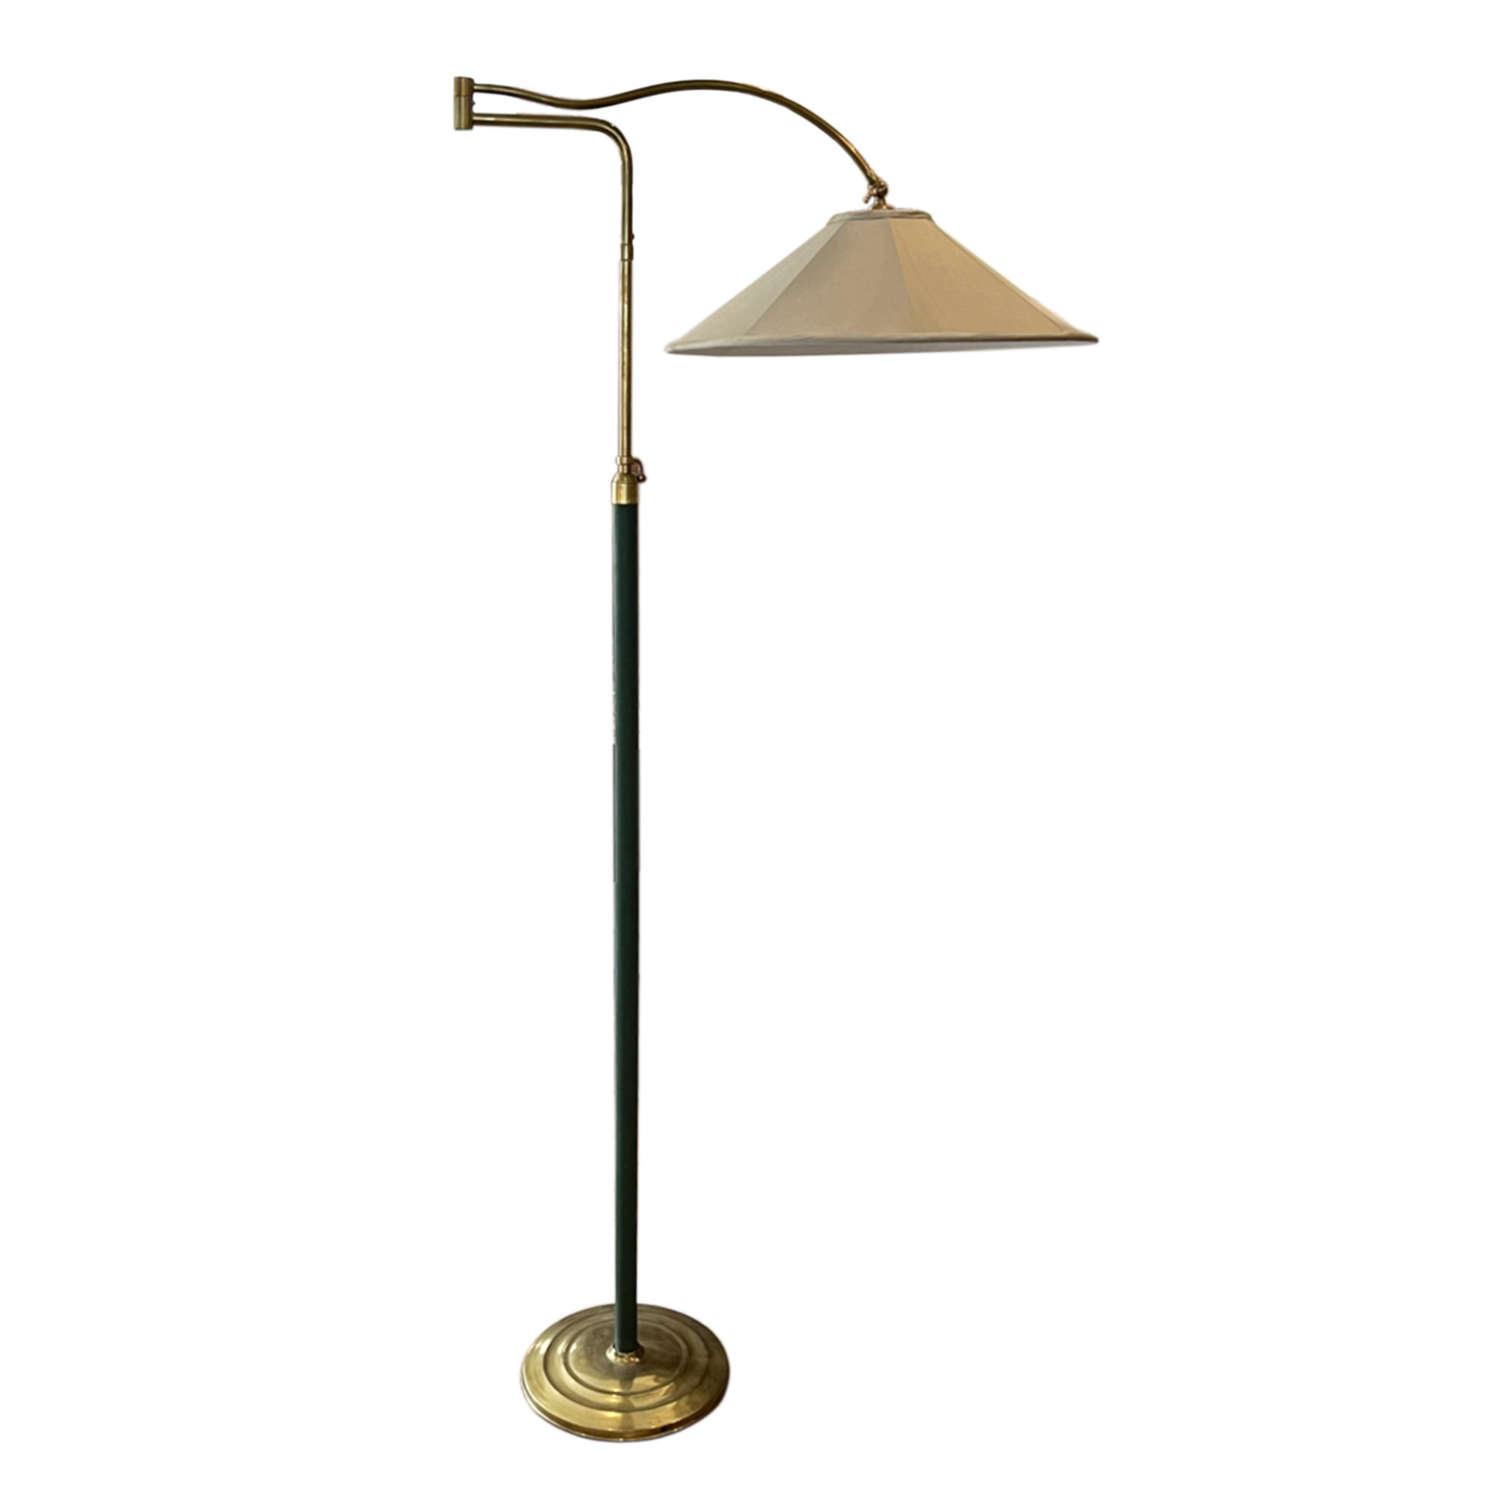 Italian 1960s Swing Arm Floor Lamp with Green Leather